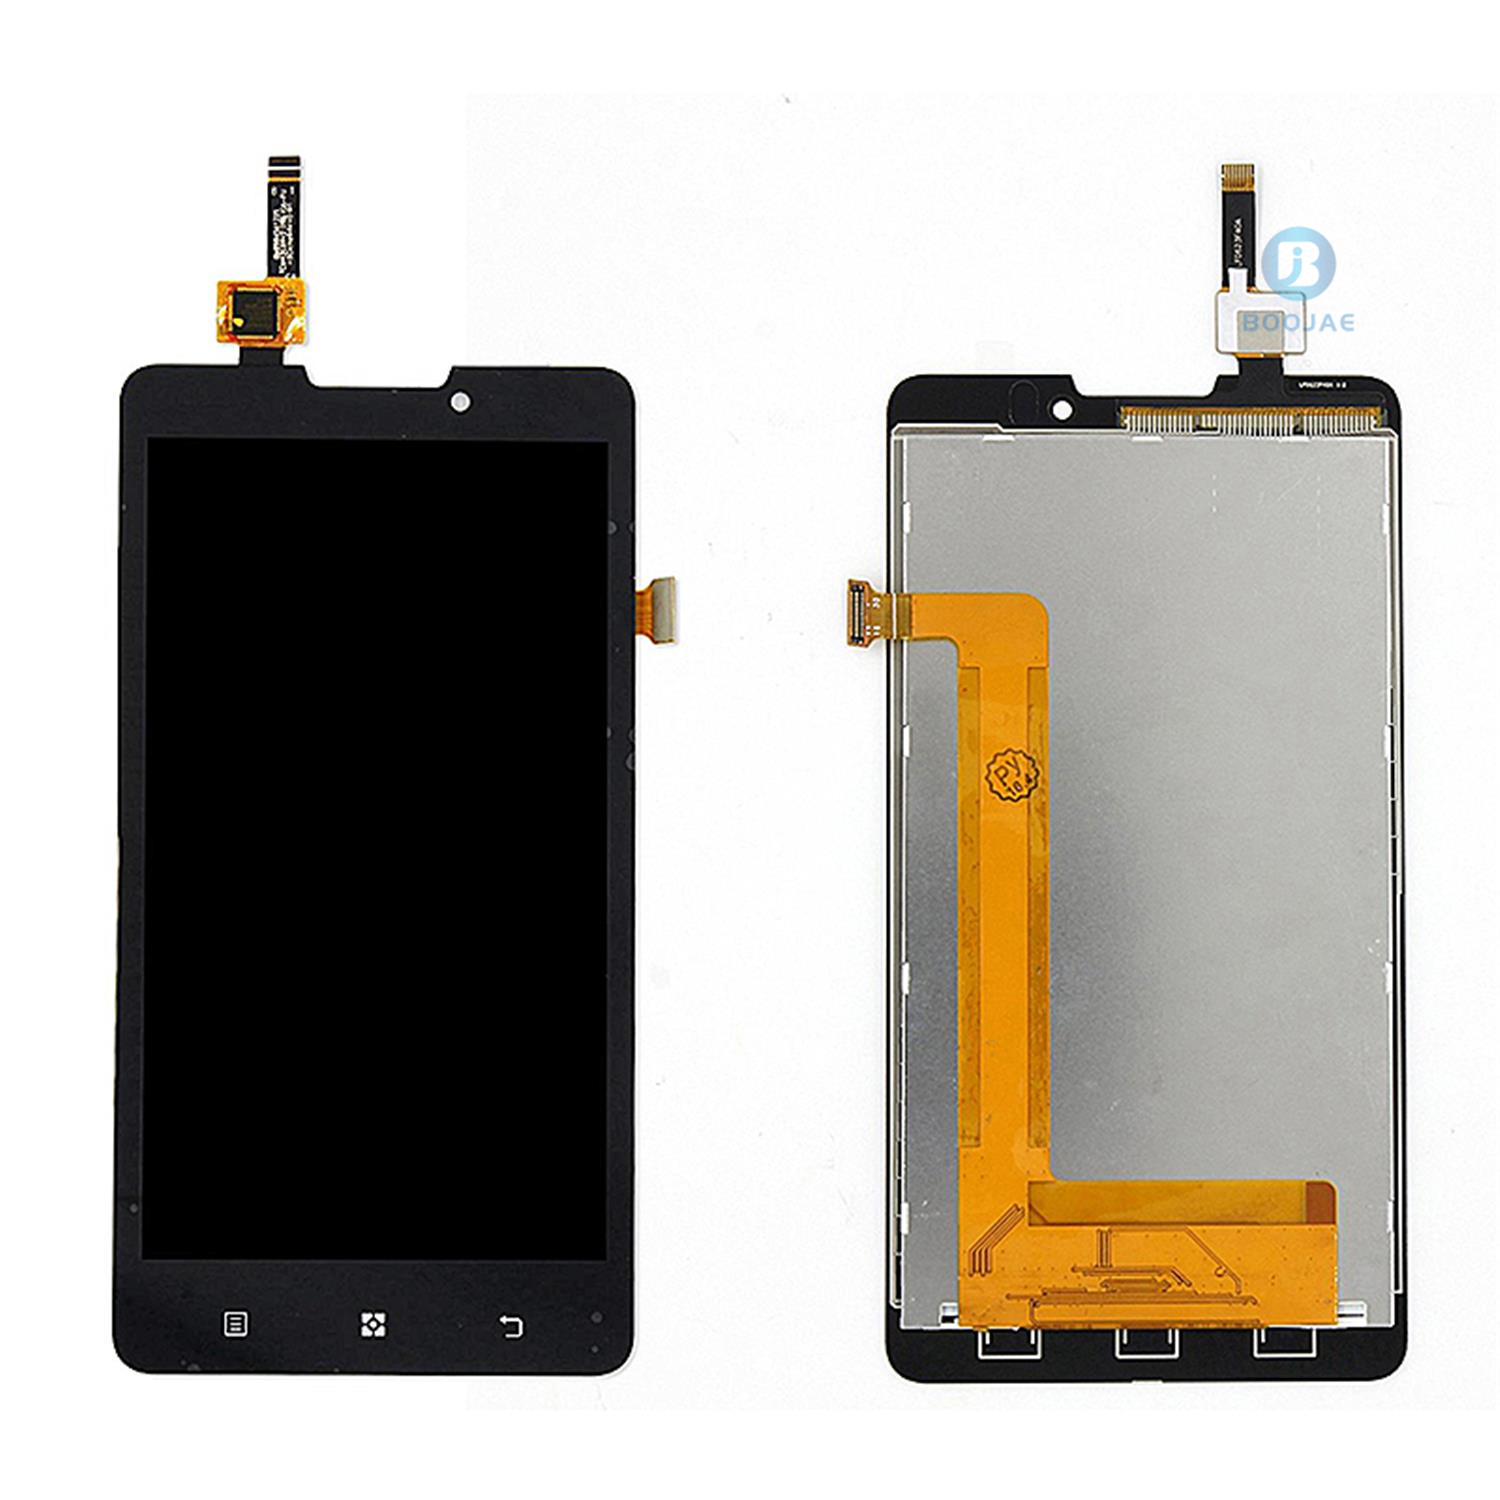 For Lenovo P780 LCD Screen Display and Touch Panel Digitizer Assembly Replacement